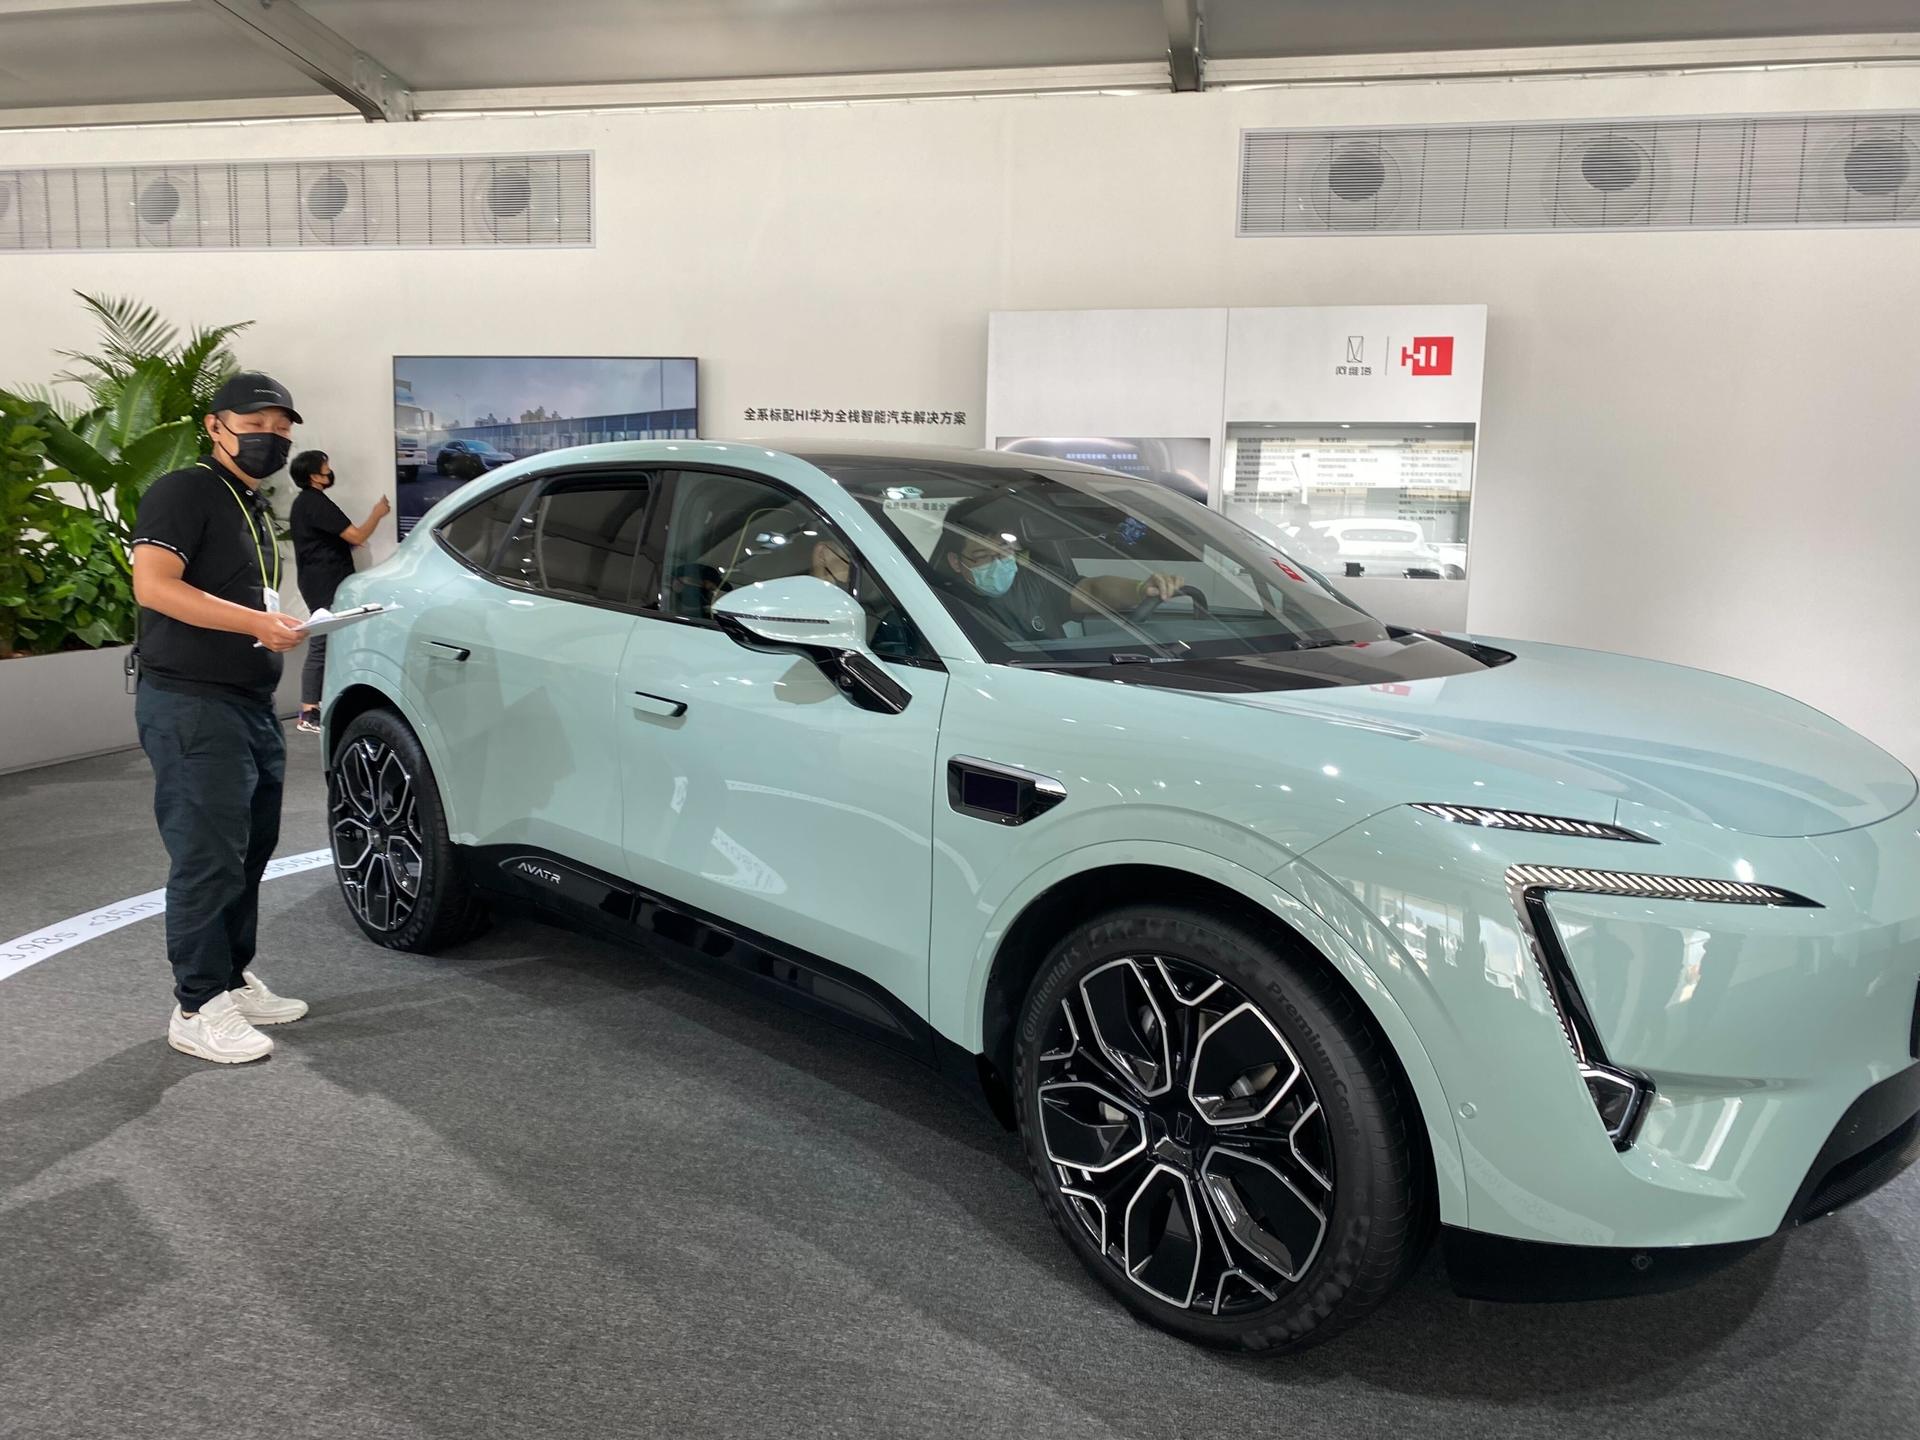 Car buyers check out the Avatr 11 electric vehicle in China.